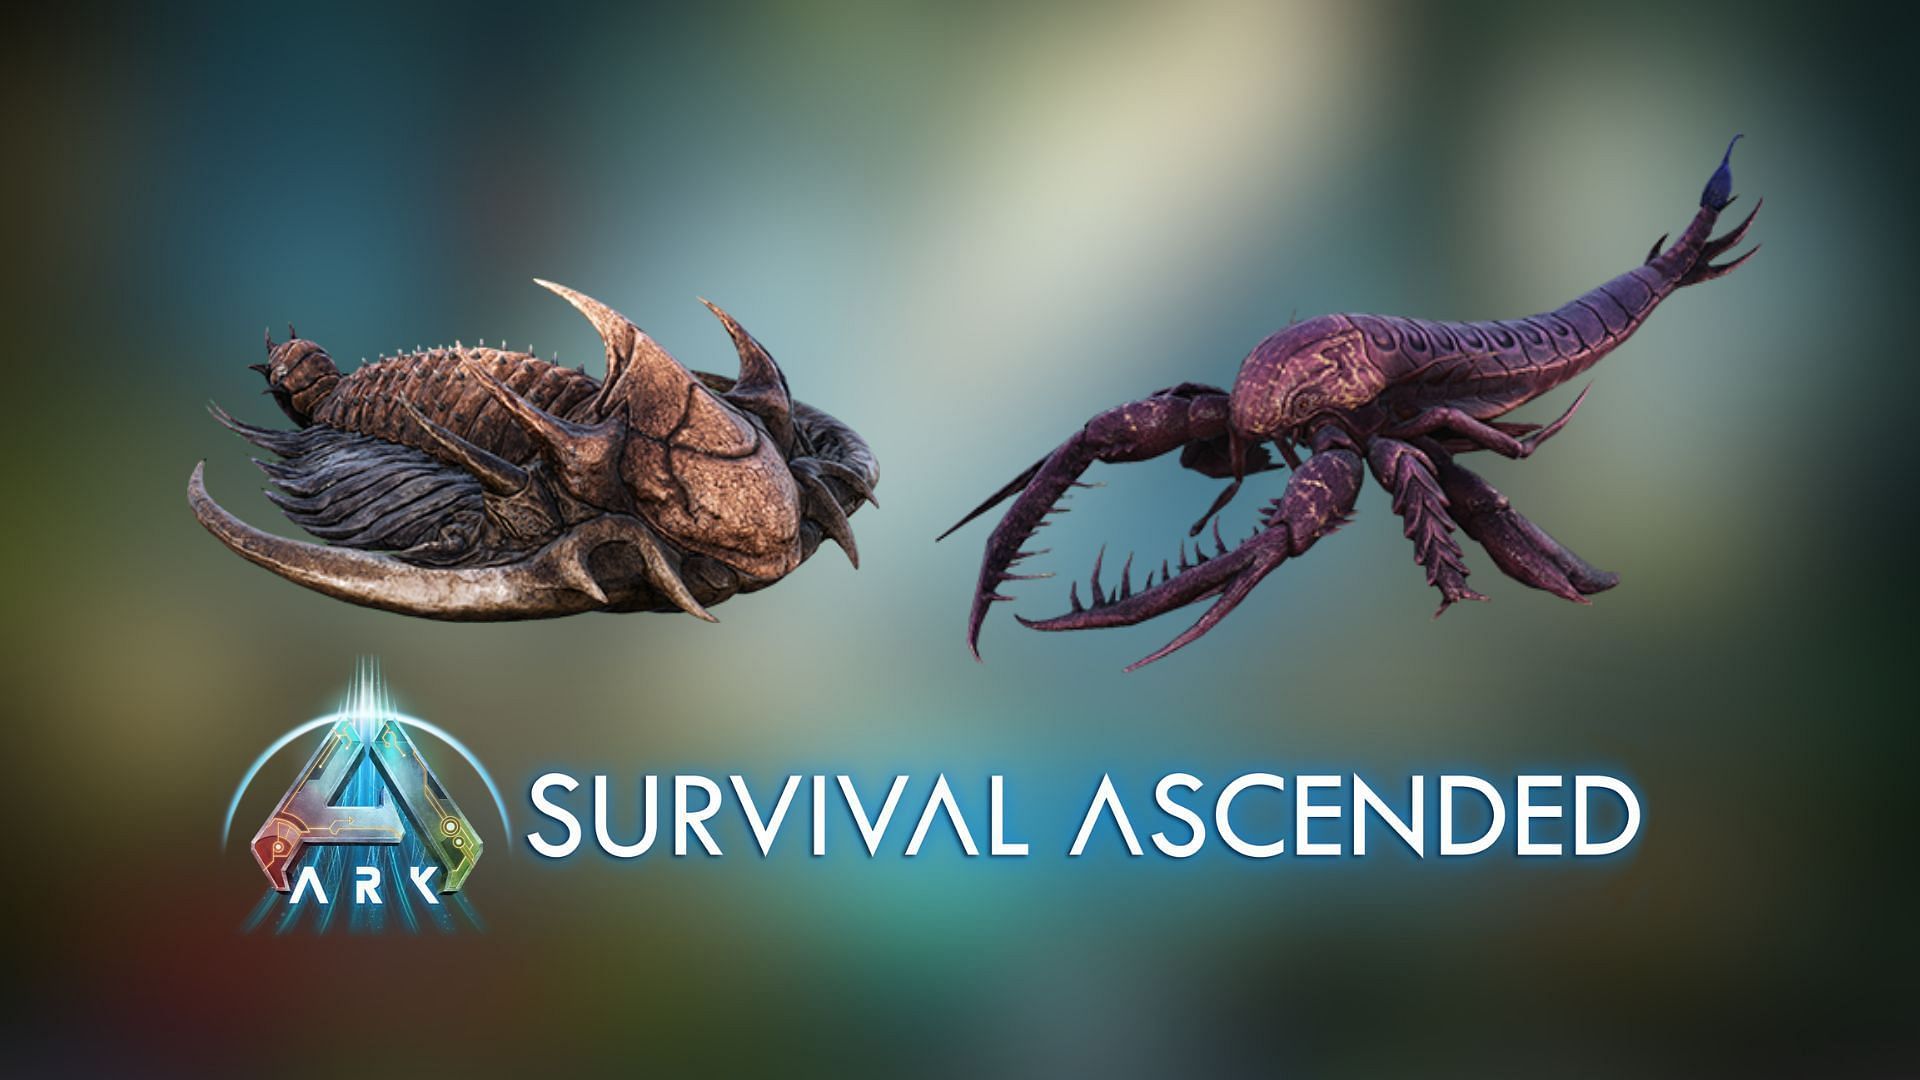 Trilobites and Eurypterid can be great to farm Black Pearl in Ark Survival Ascended (Image via Studio Wildcard)